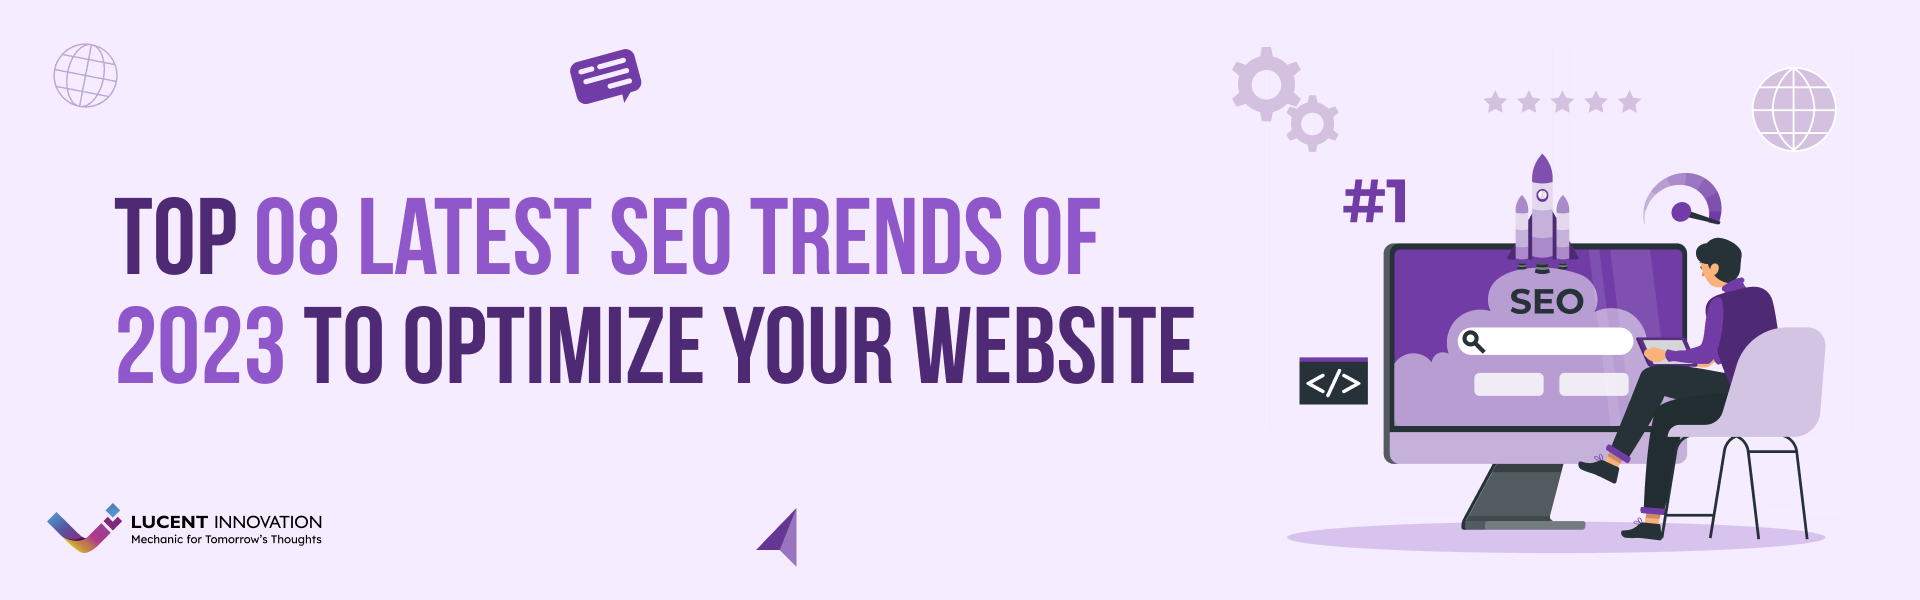 Top 08 Latest SEO Trends Of 2023 to Optimize Your Website